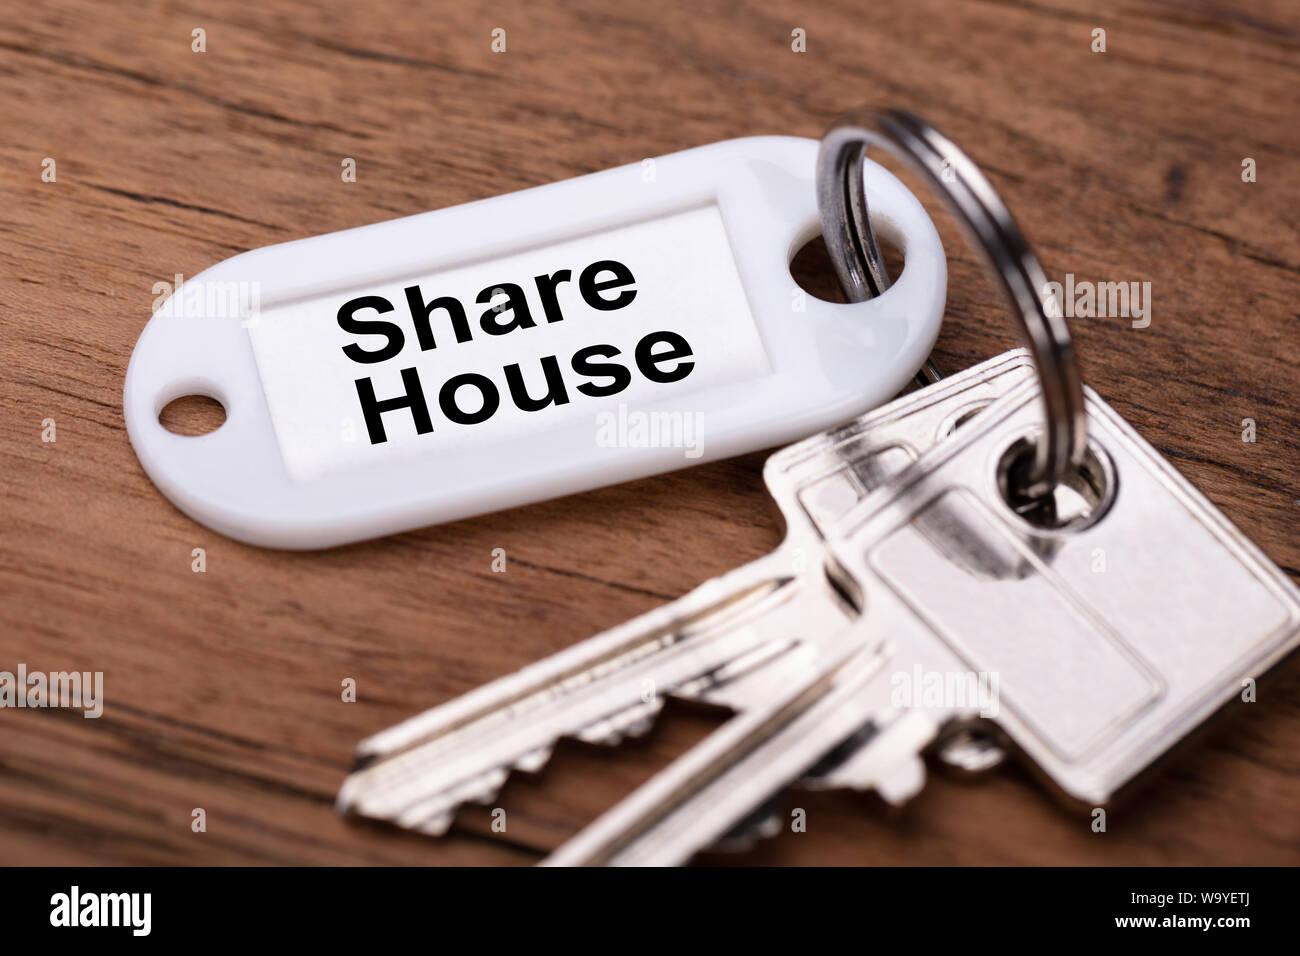 Close-up Of Share House Keys On Wooden Desk Stock Photo